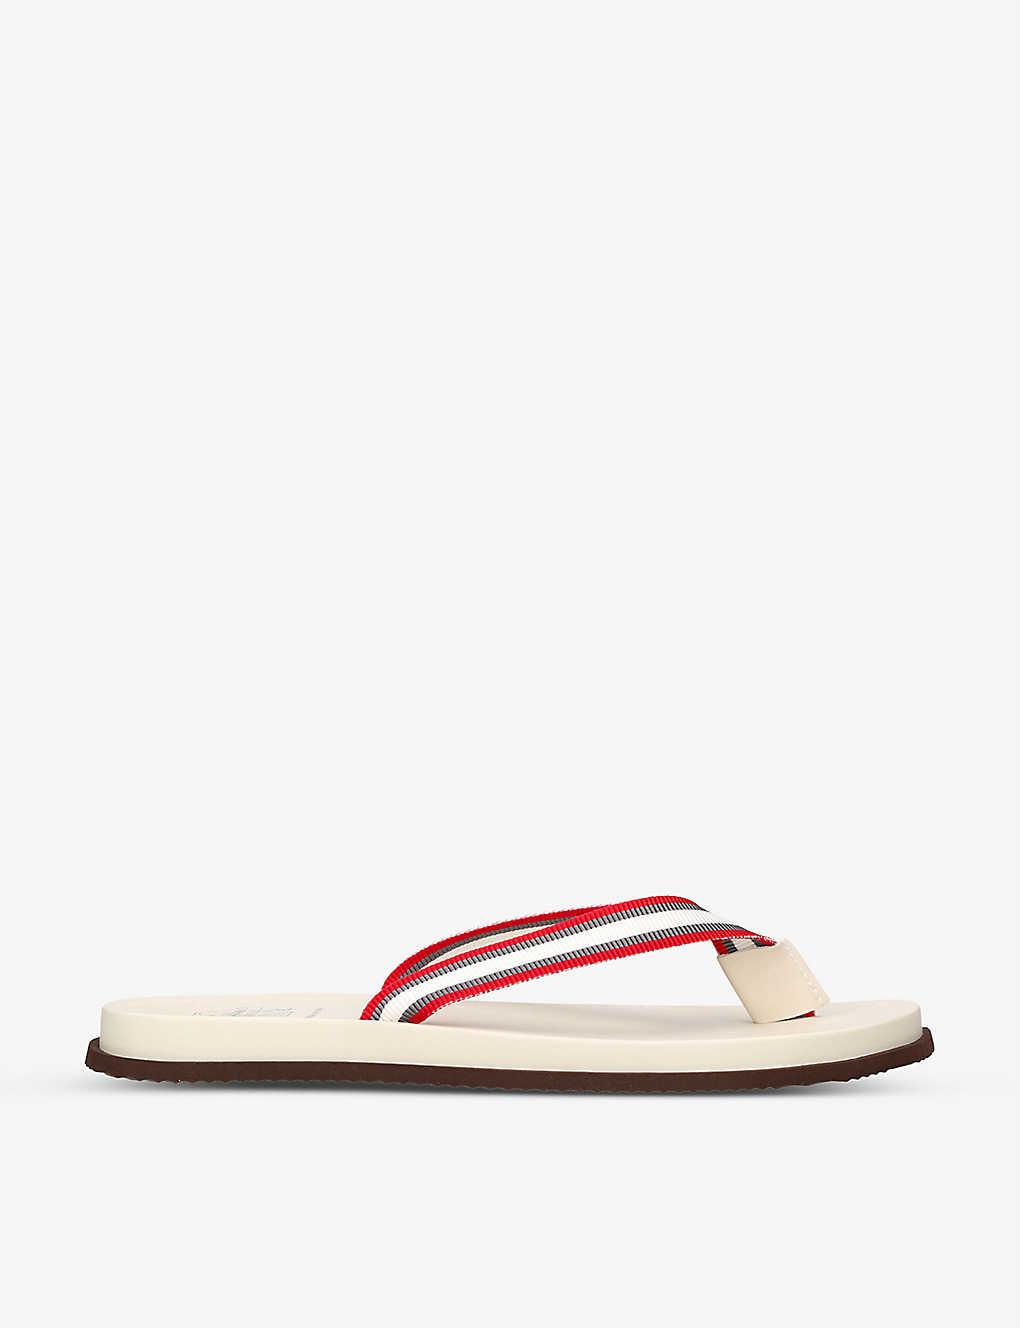 Brunello Cucinelli Tape-strap Calf-leather Flip Flops in Red for Men | Lyst